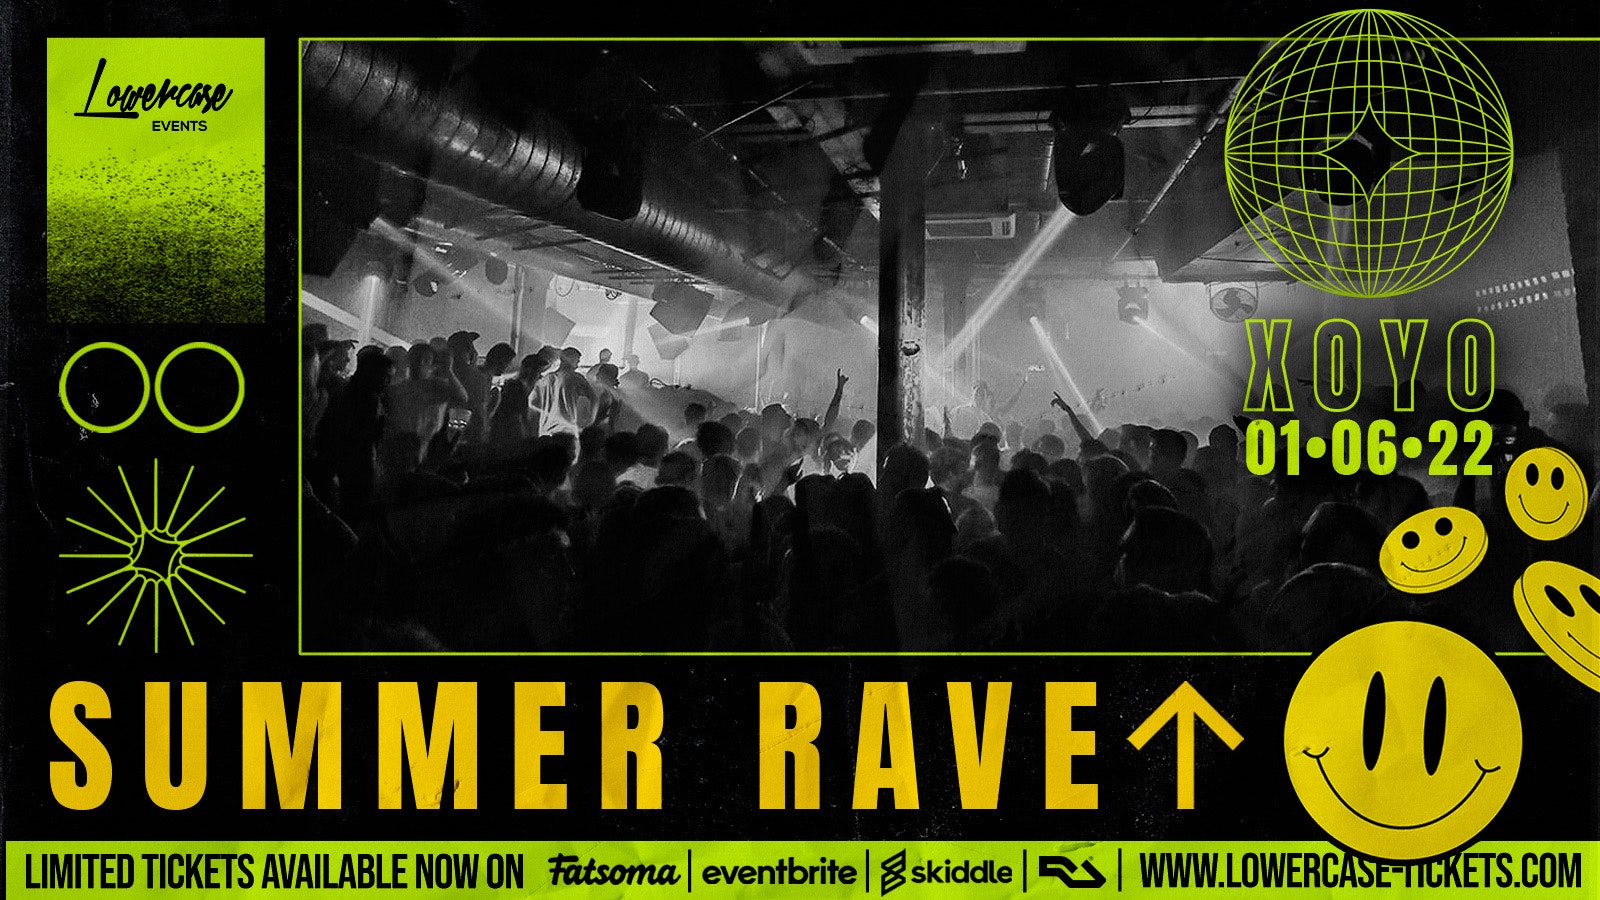 The Summer Rave @ FIRE! First 300 tickets are ONLY £3 ✅